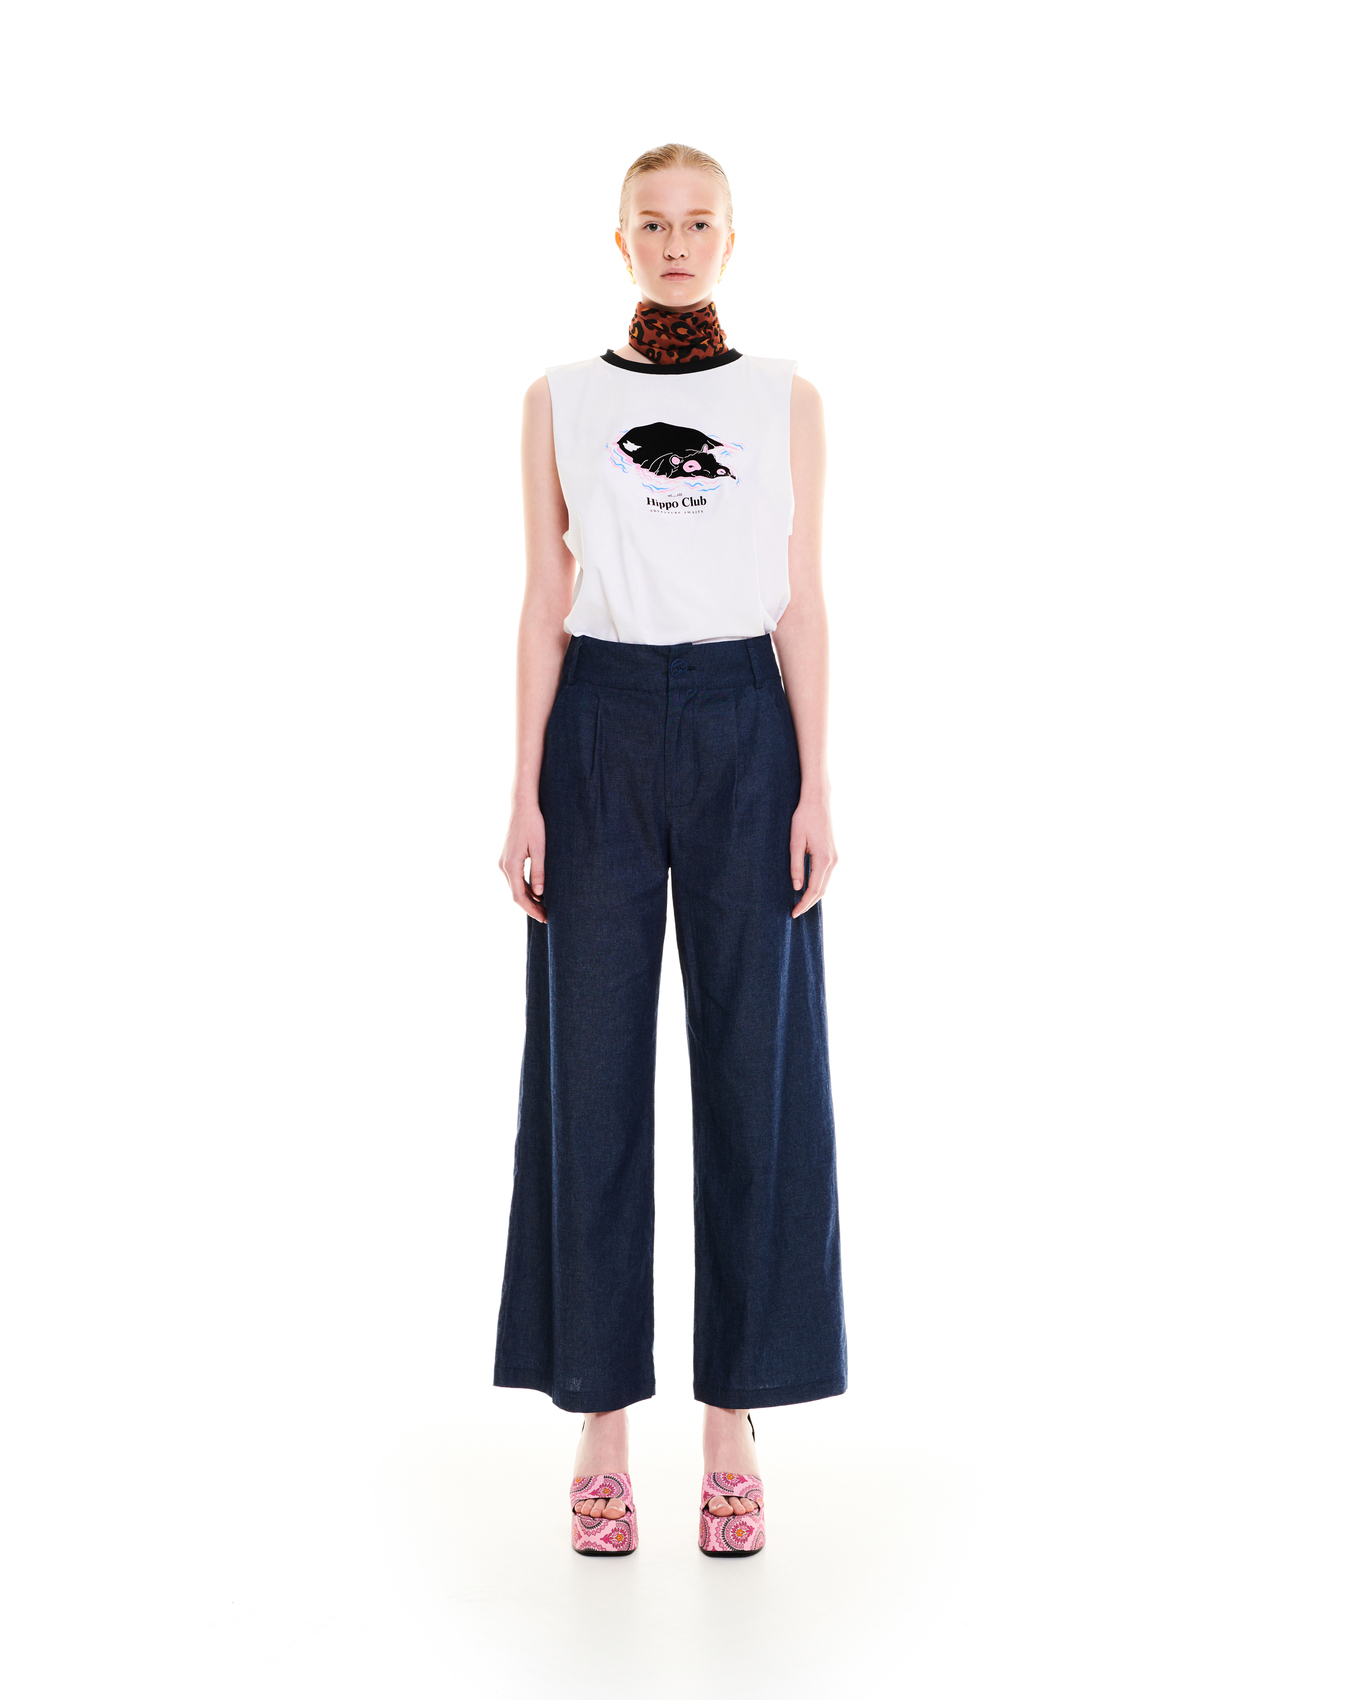 WEARE_SS23_0816_hippo_front